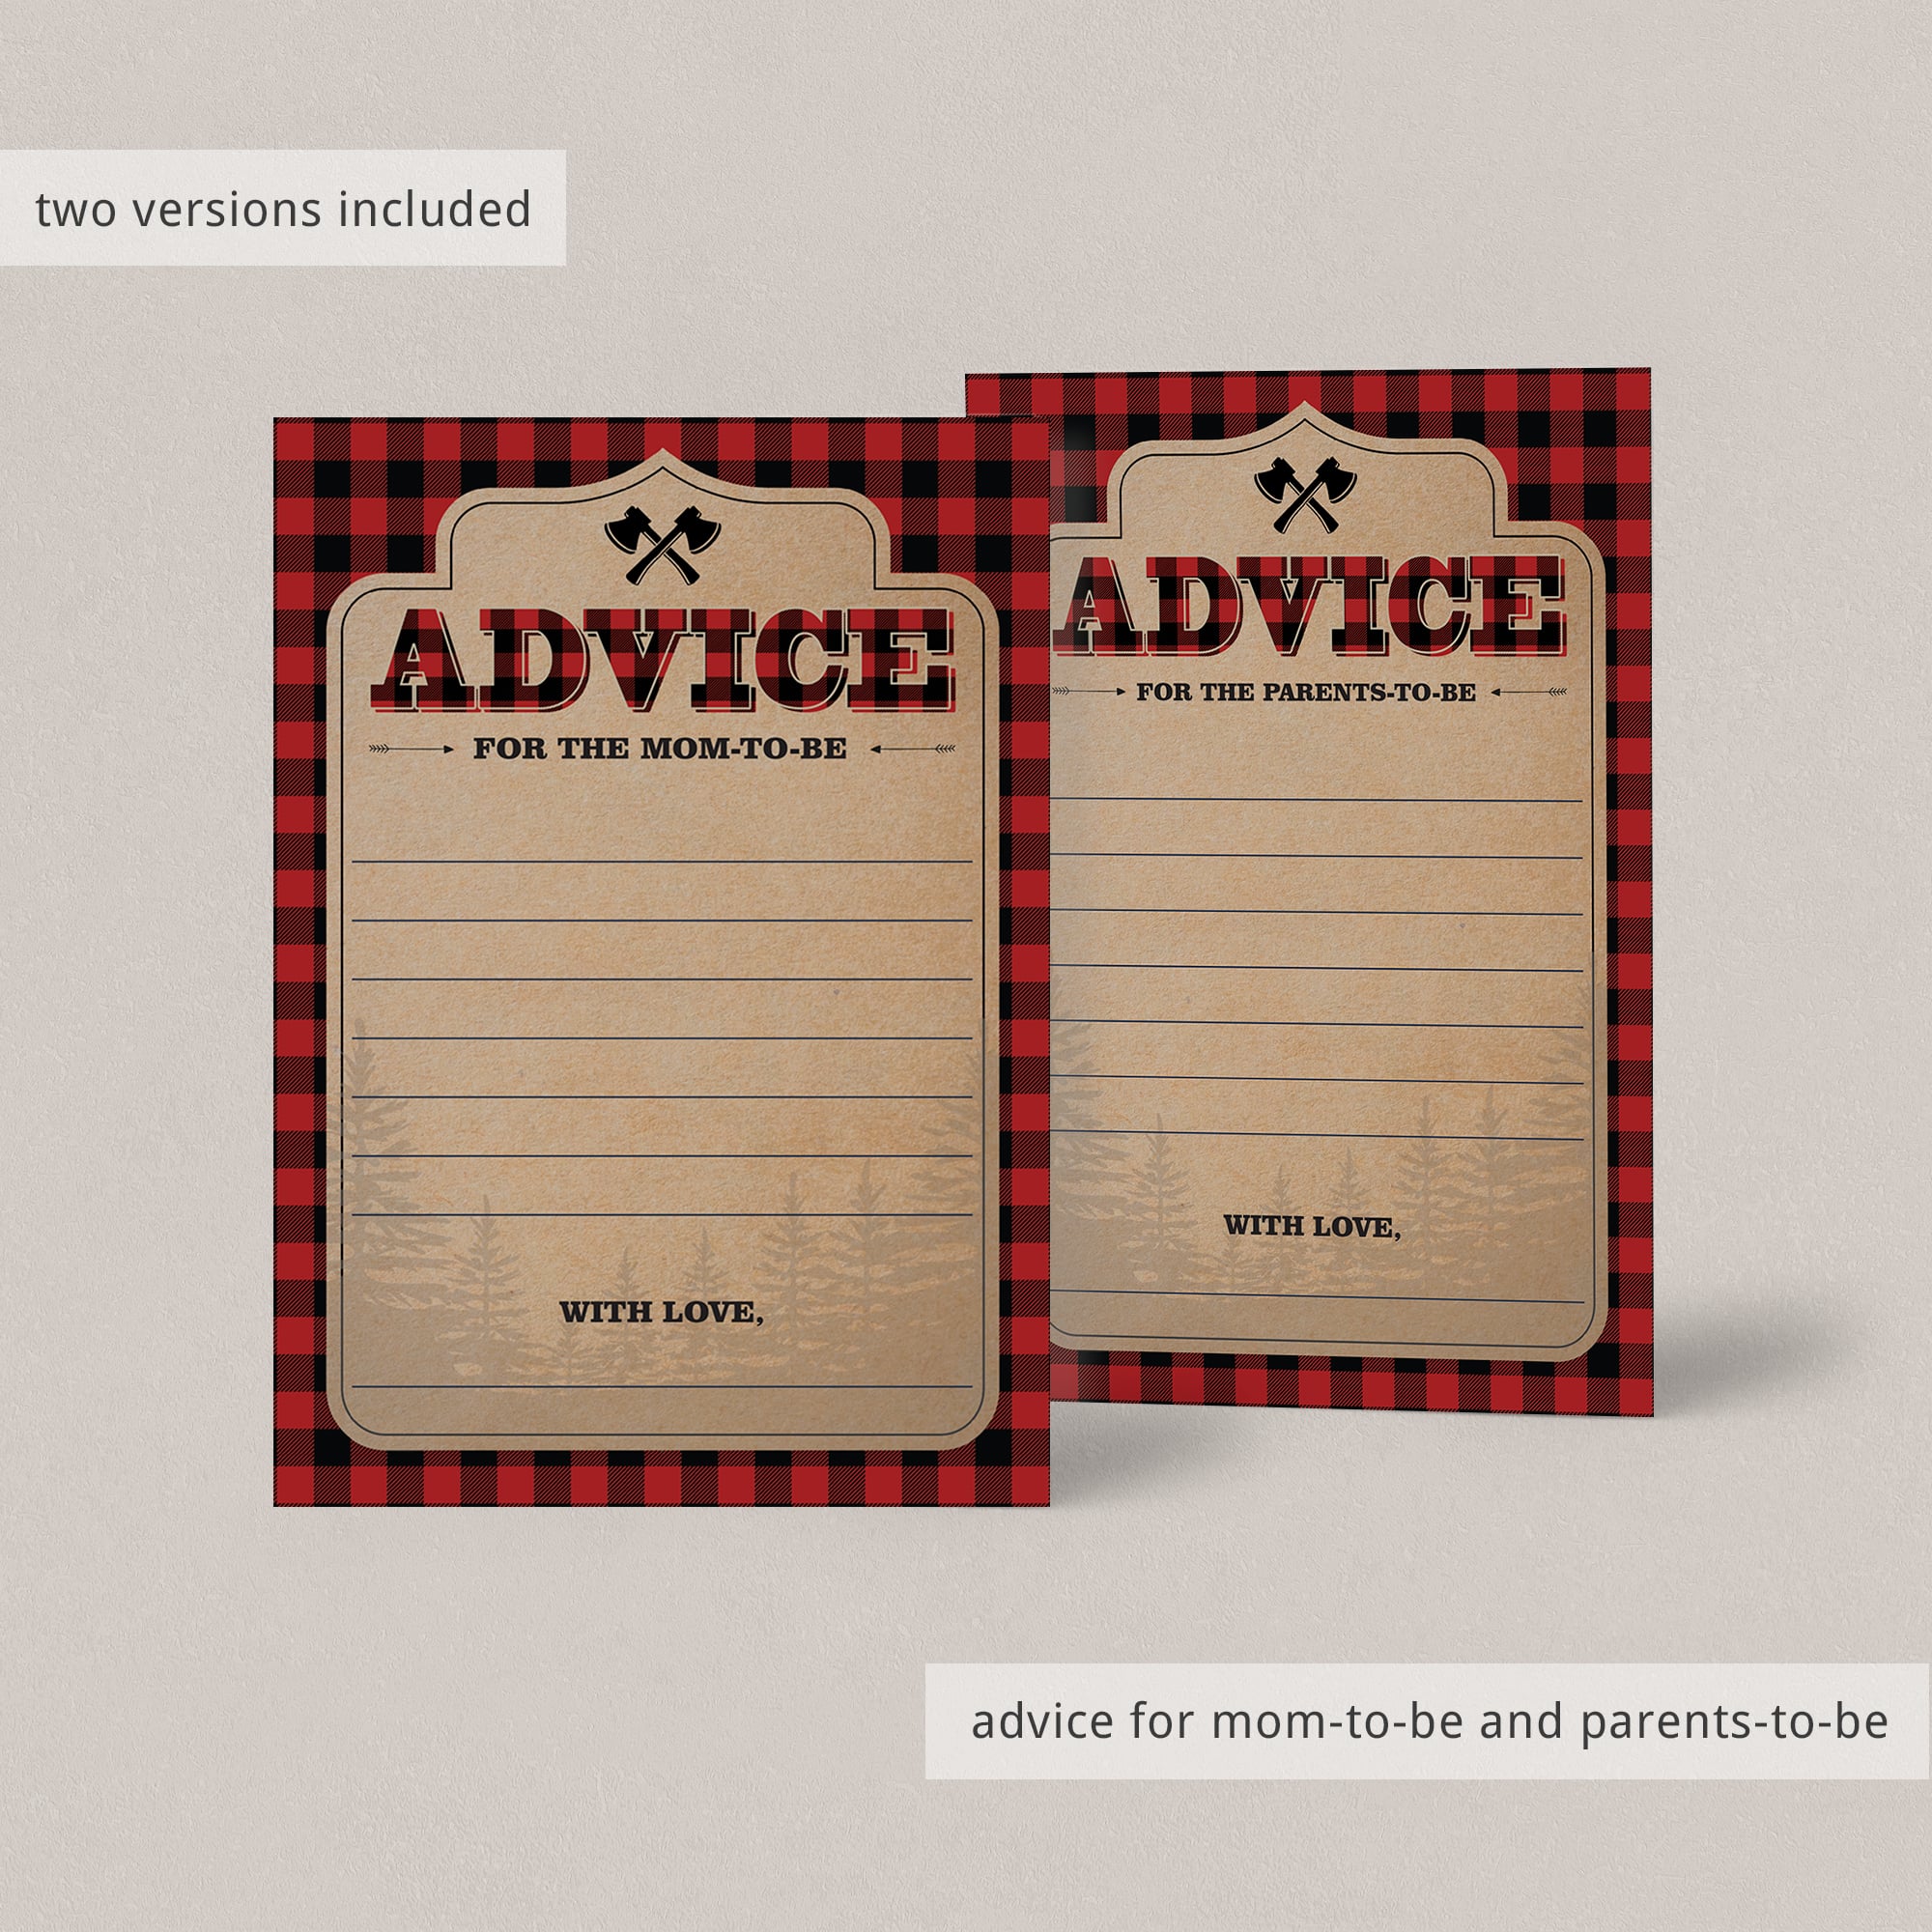 Advice cards for new parents by LittleSizzle